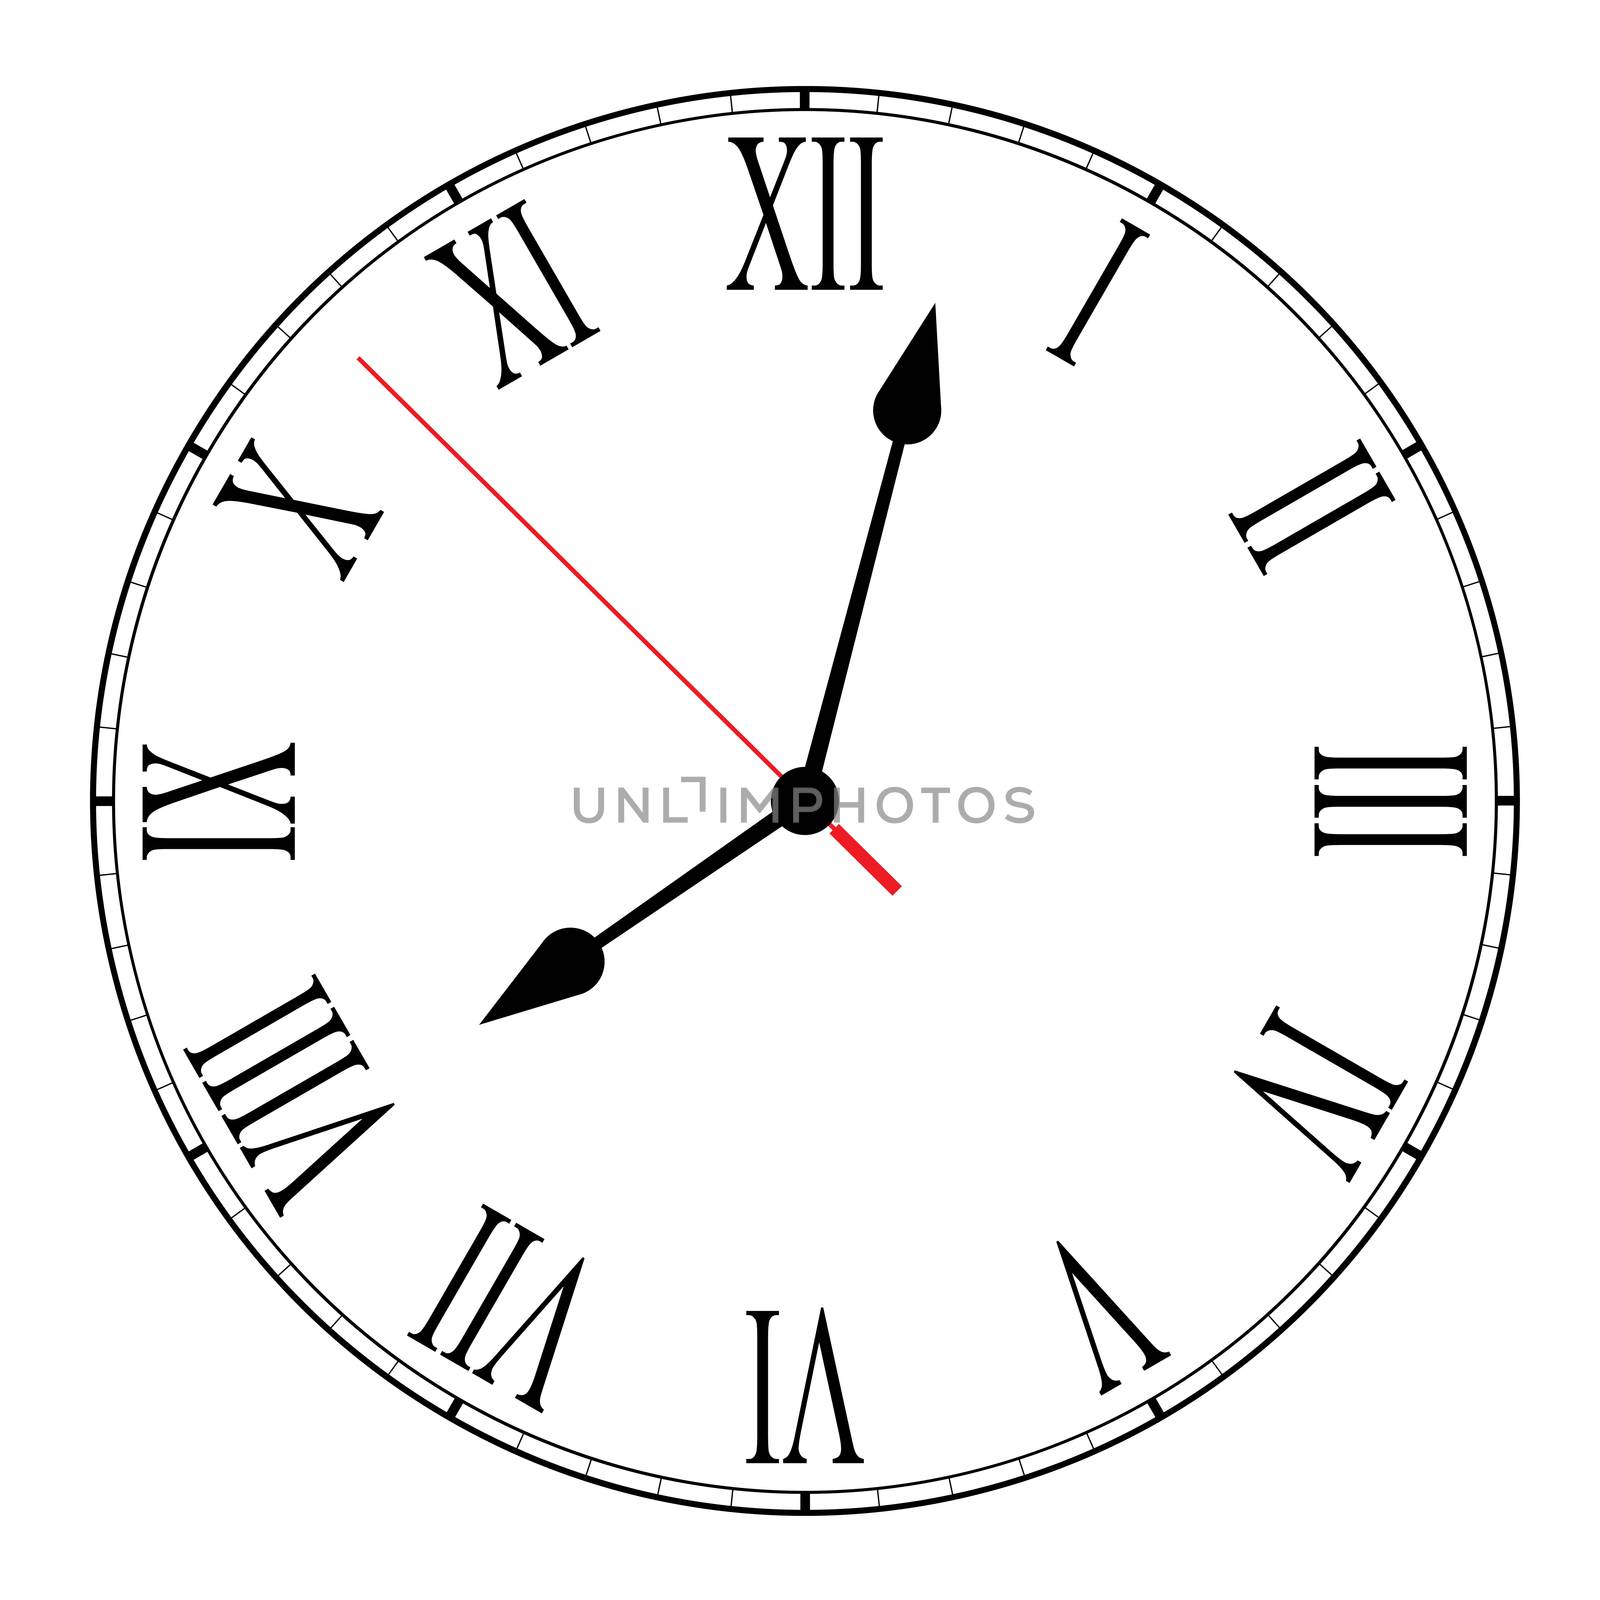 Vector illustration of blank clock face dial with Roman numerals, hour, minute and second hands isolated on white background